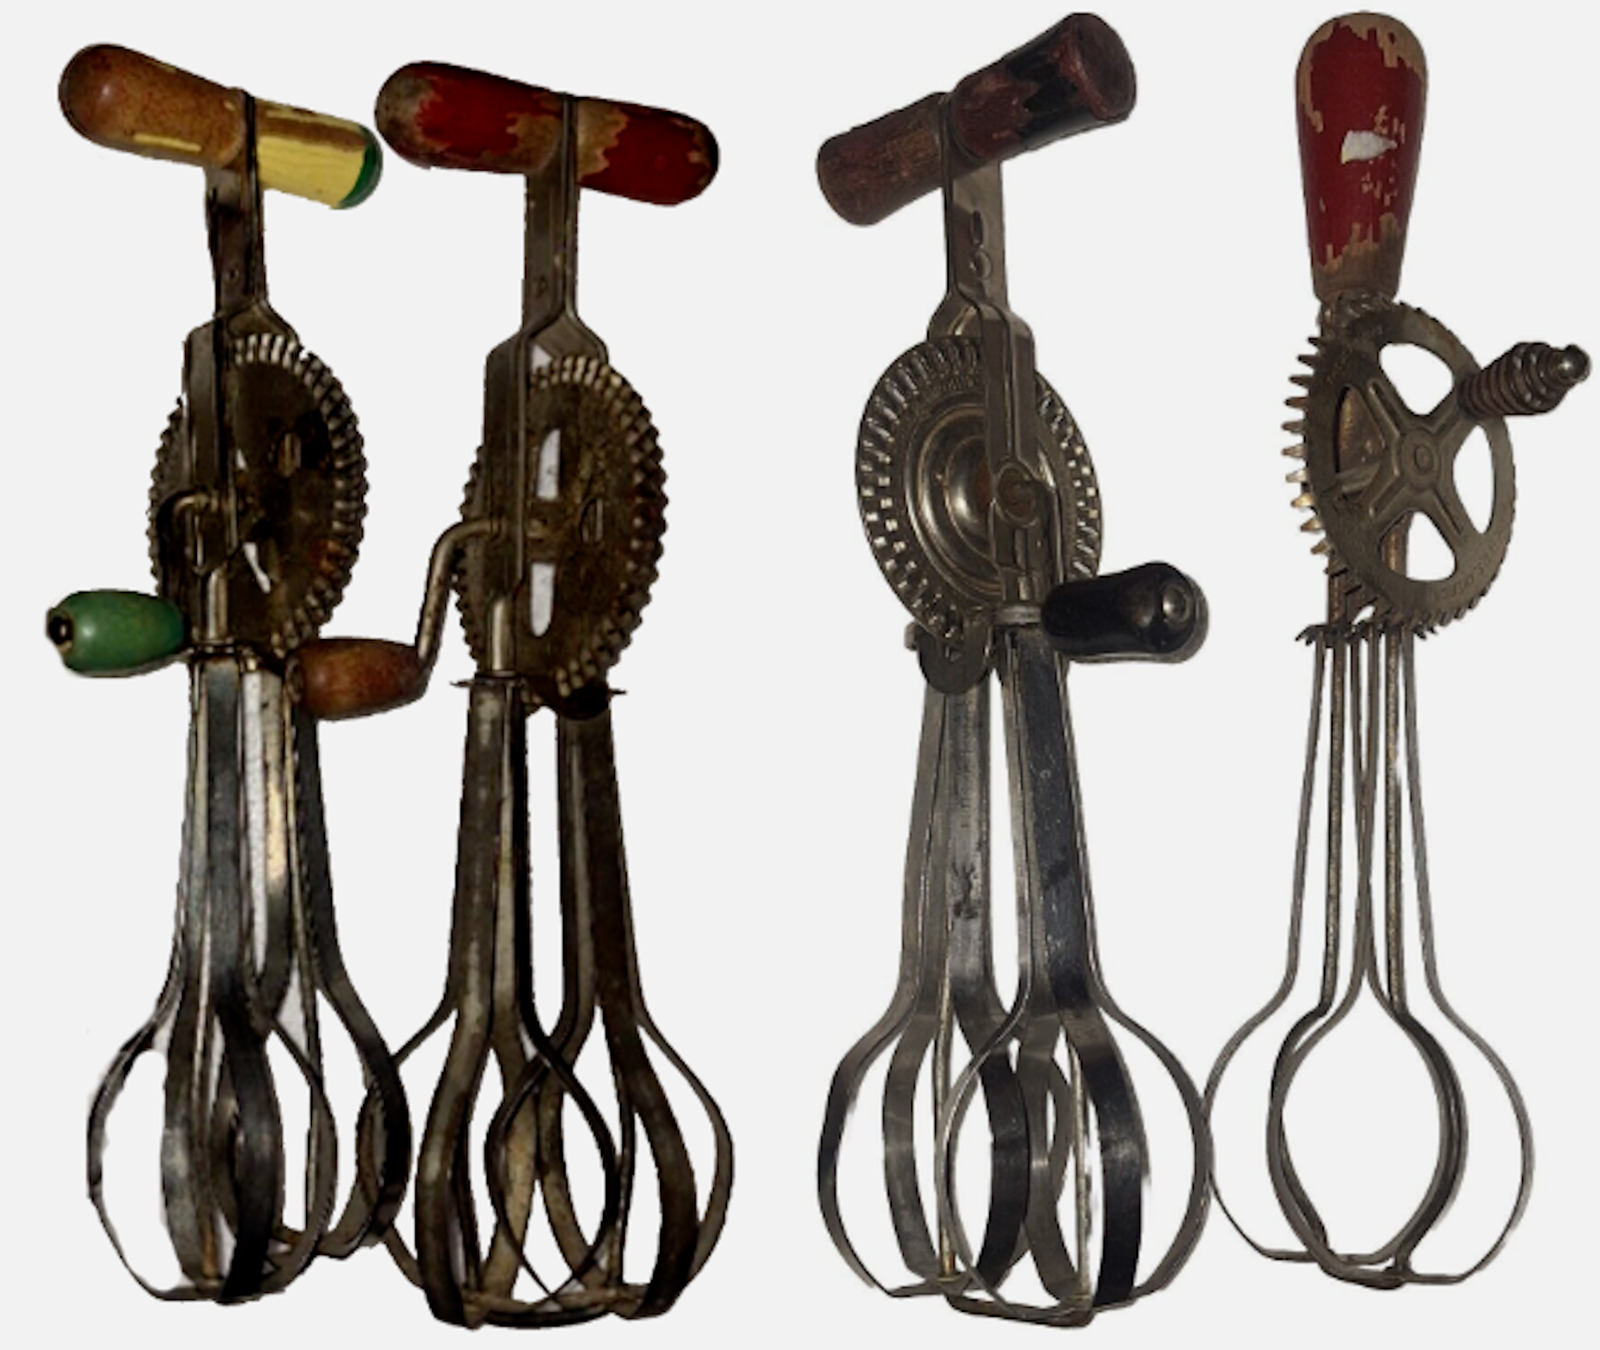 Lof of 4 Vintage Egg Beaters Mixers